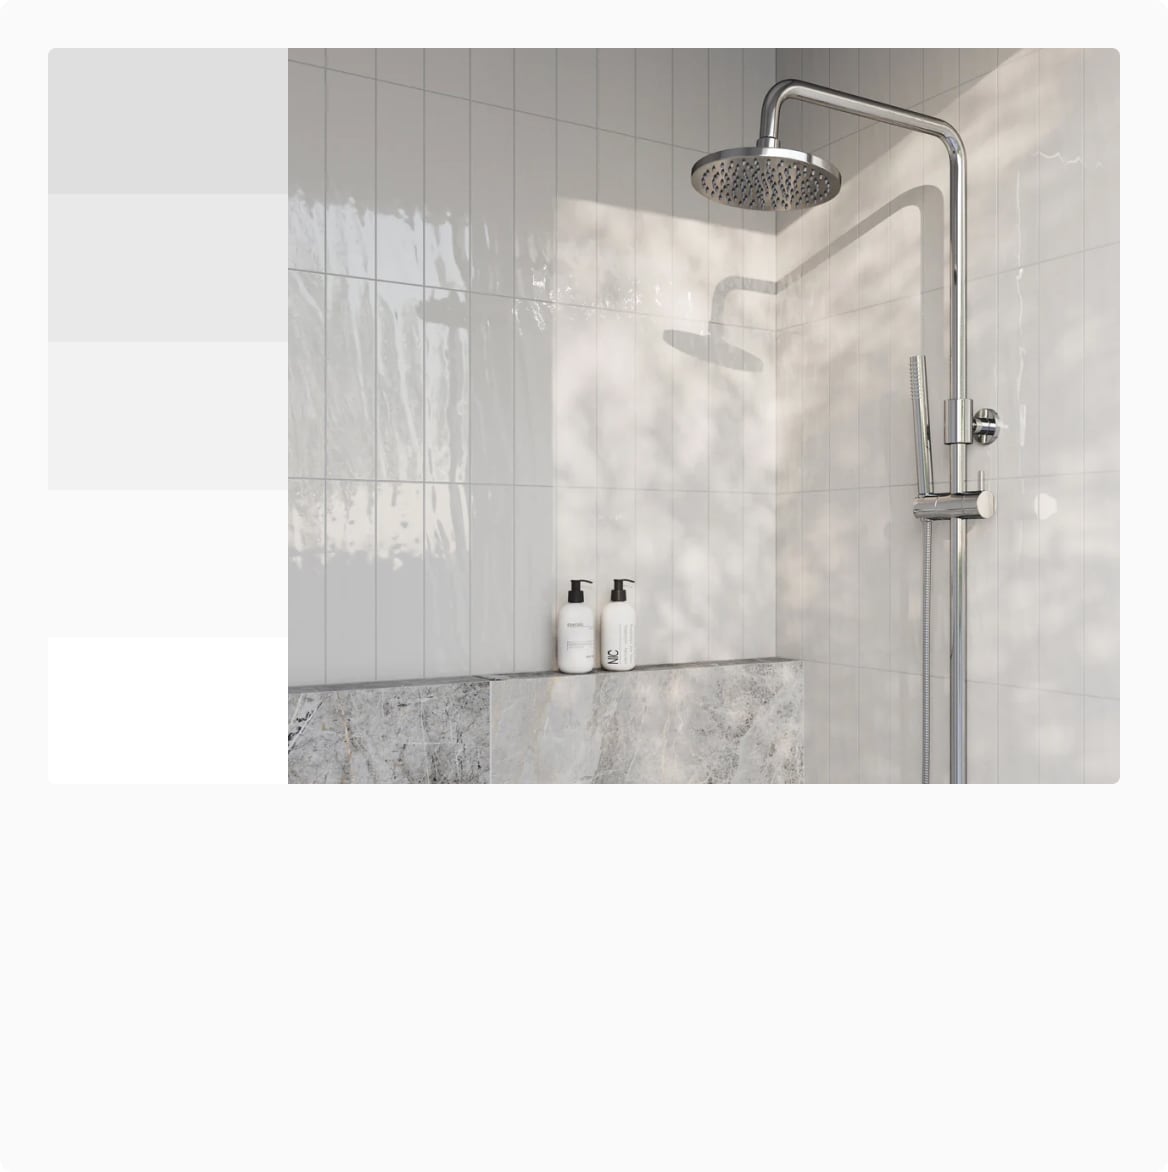 Chic white subway tiles clad a modern bathroom shower, creating a sleek, timeless look that brightens and enlarges the space.